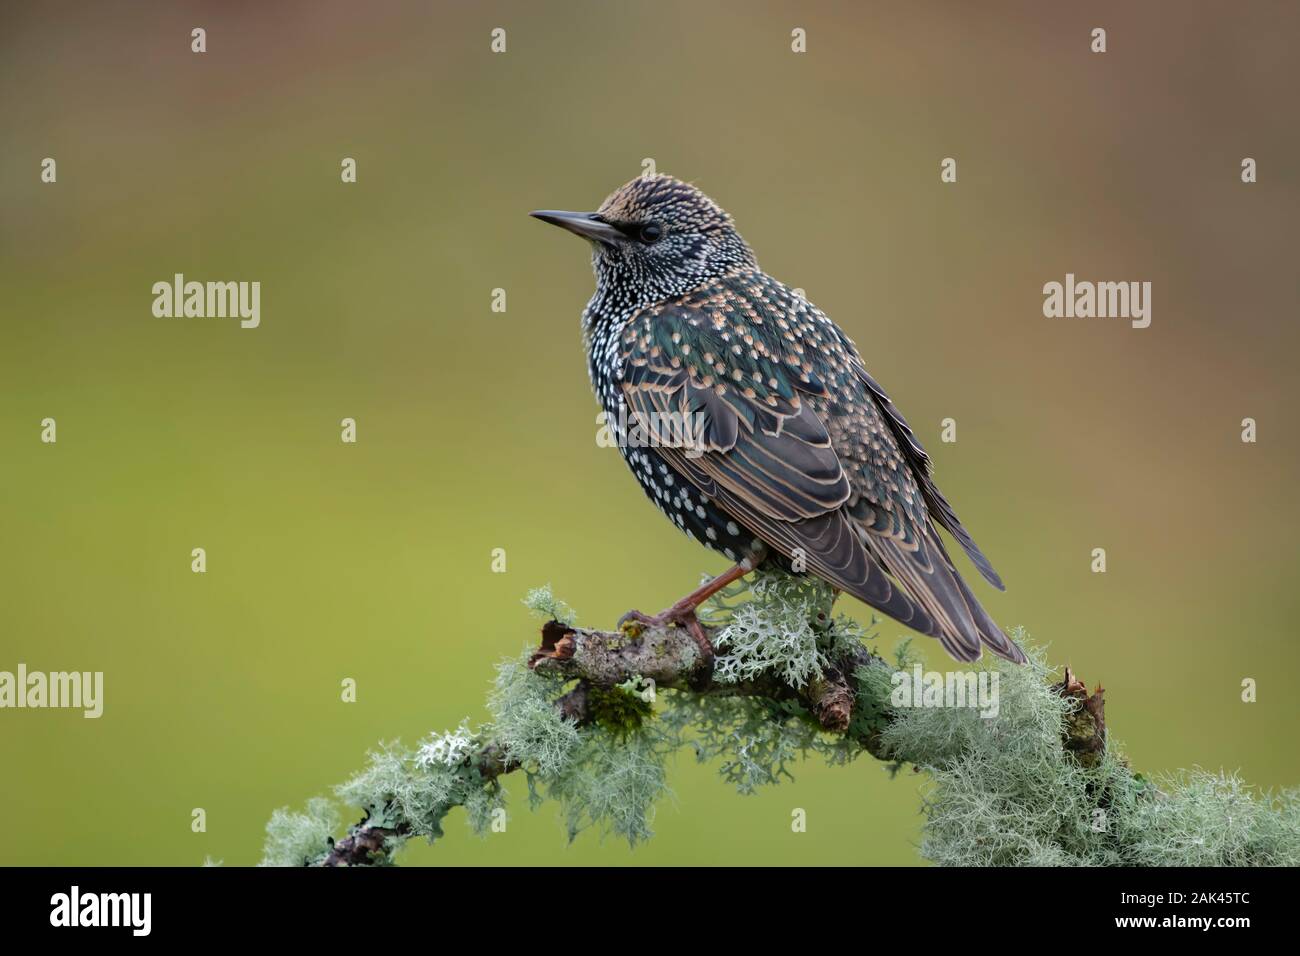 Starling (Sturnus vulgaris). Perched on lichen covered branch Stock Photo